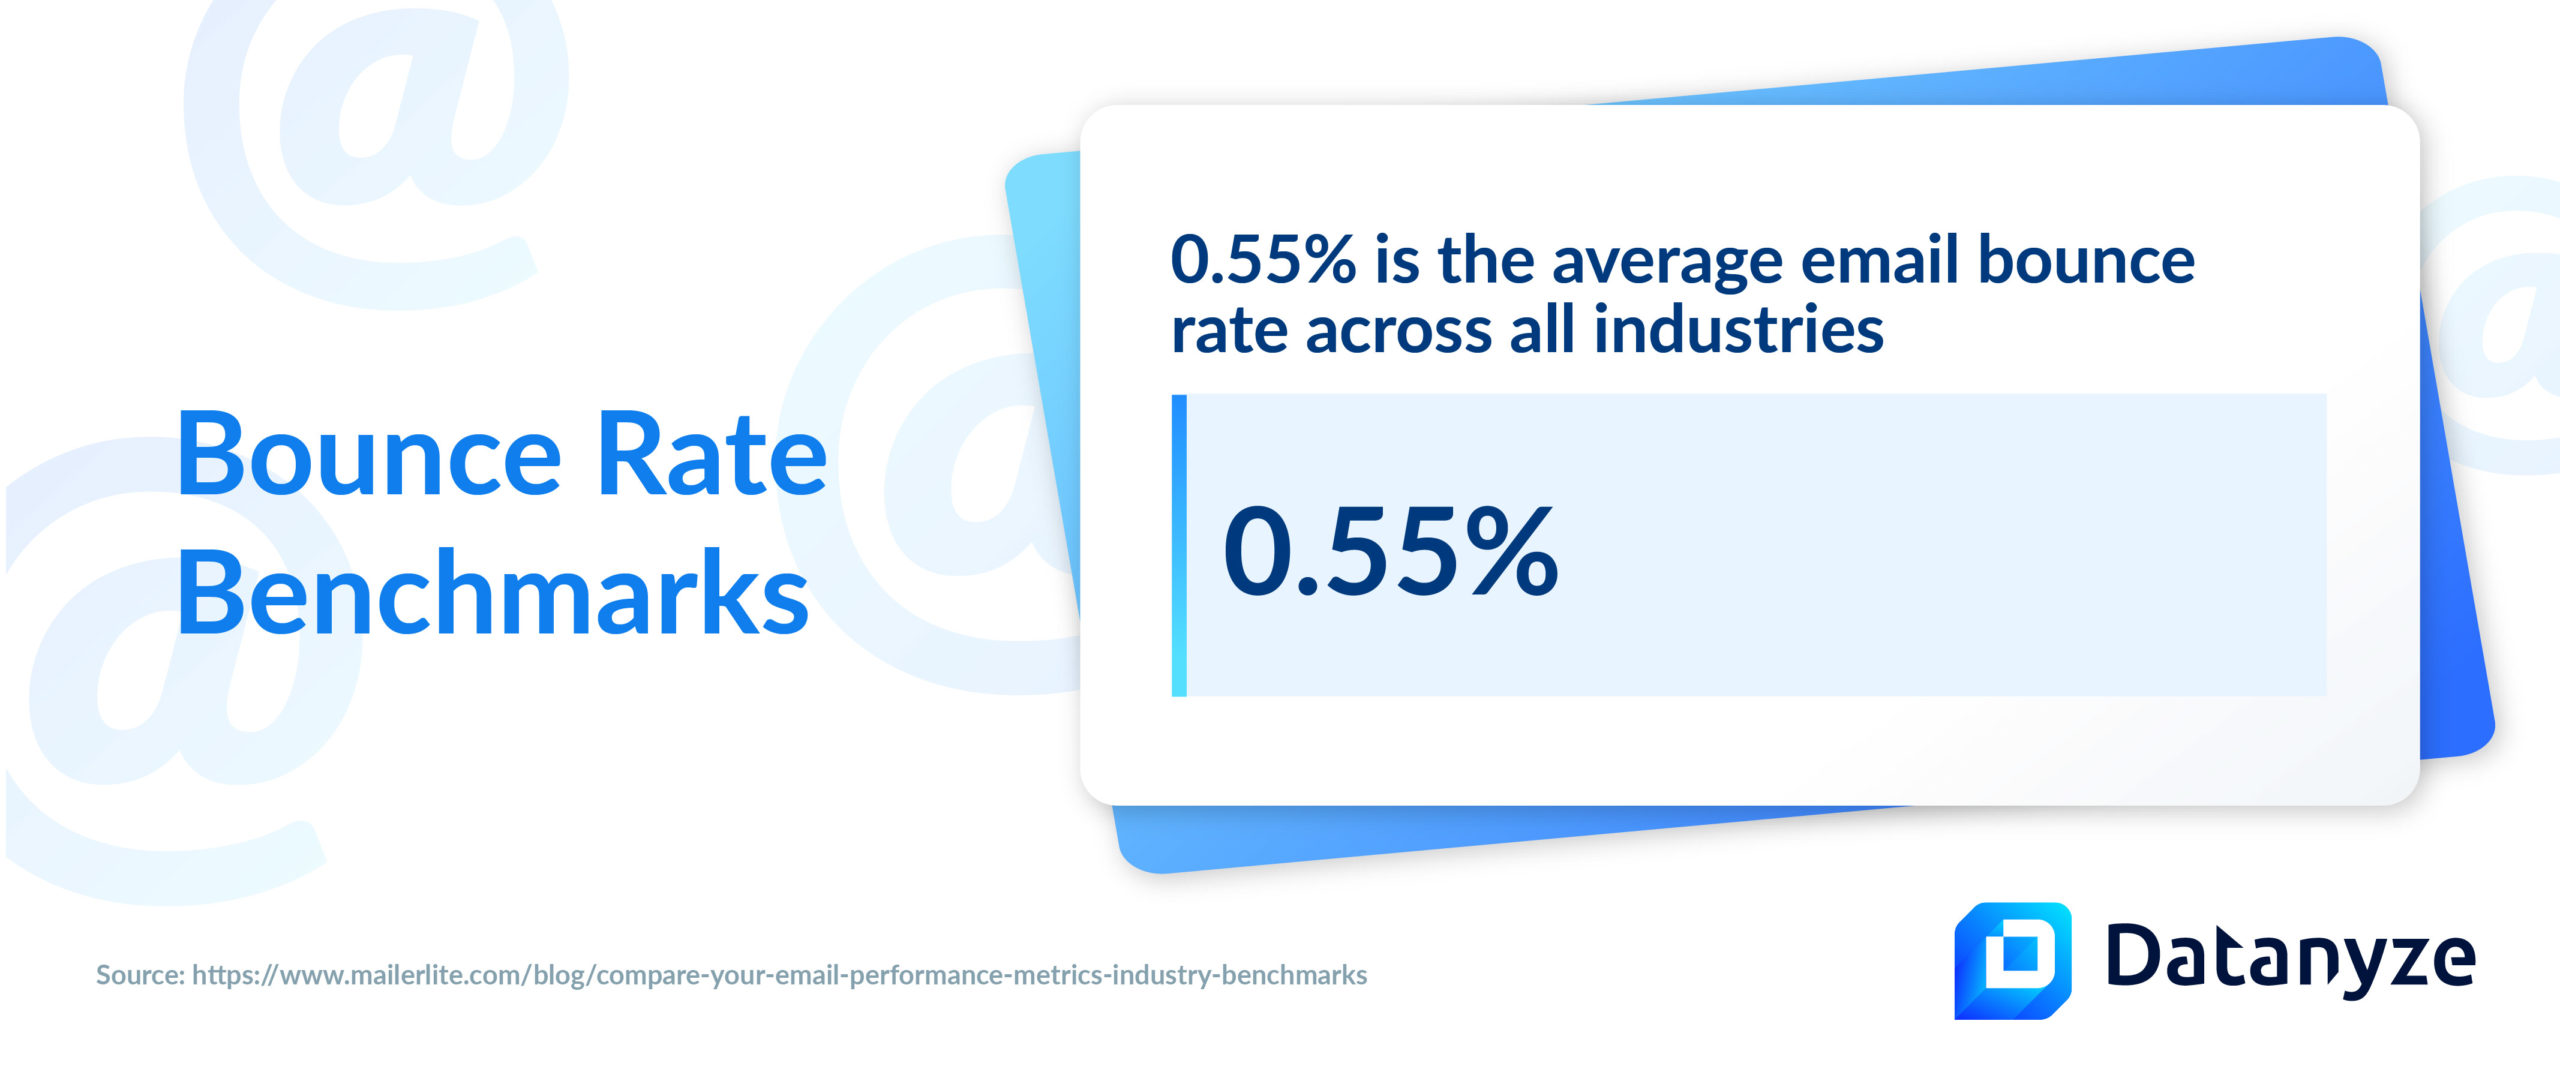 0.55% is the average email bounce rate across all industries